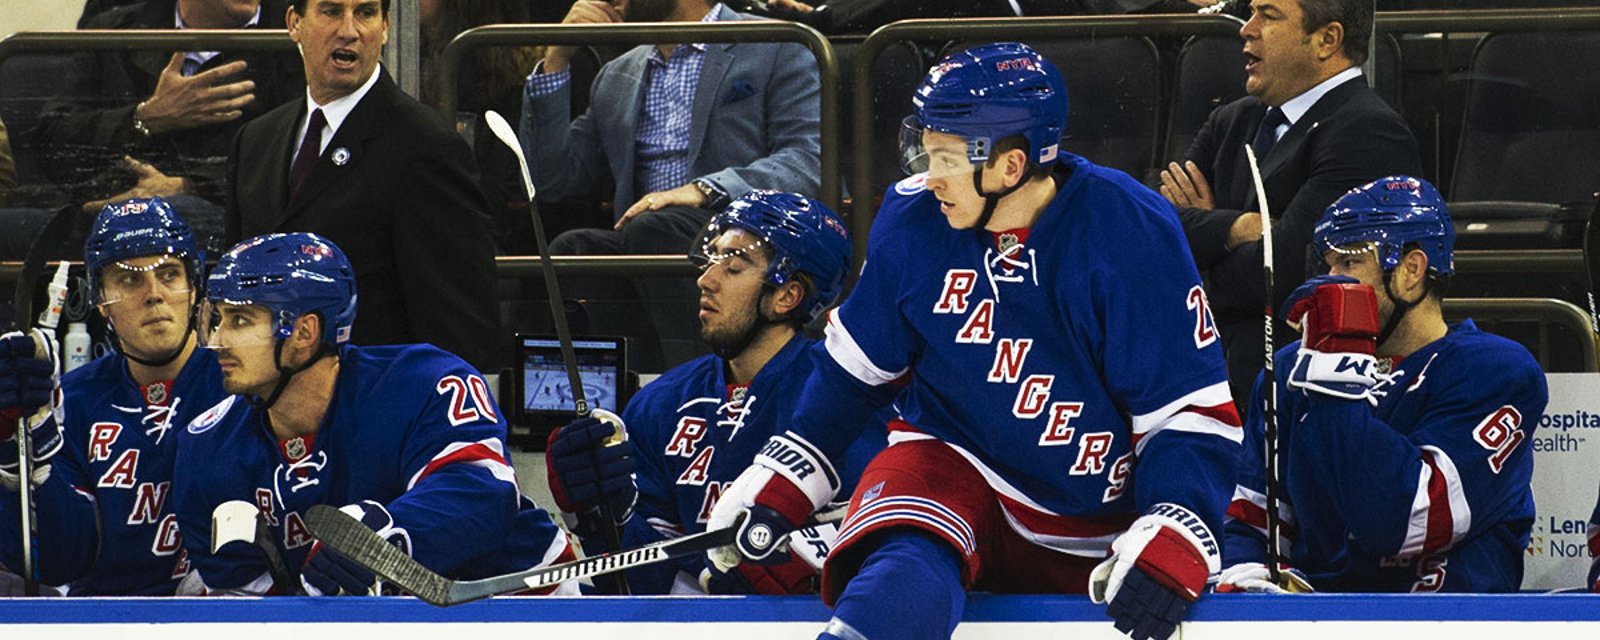 Breaking: Another Top6 forward sidelined for the Rangers!